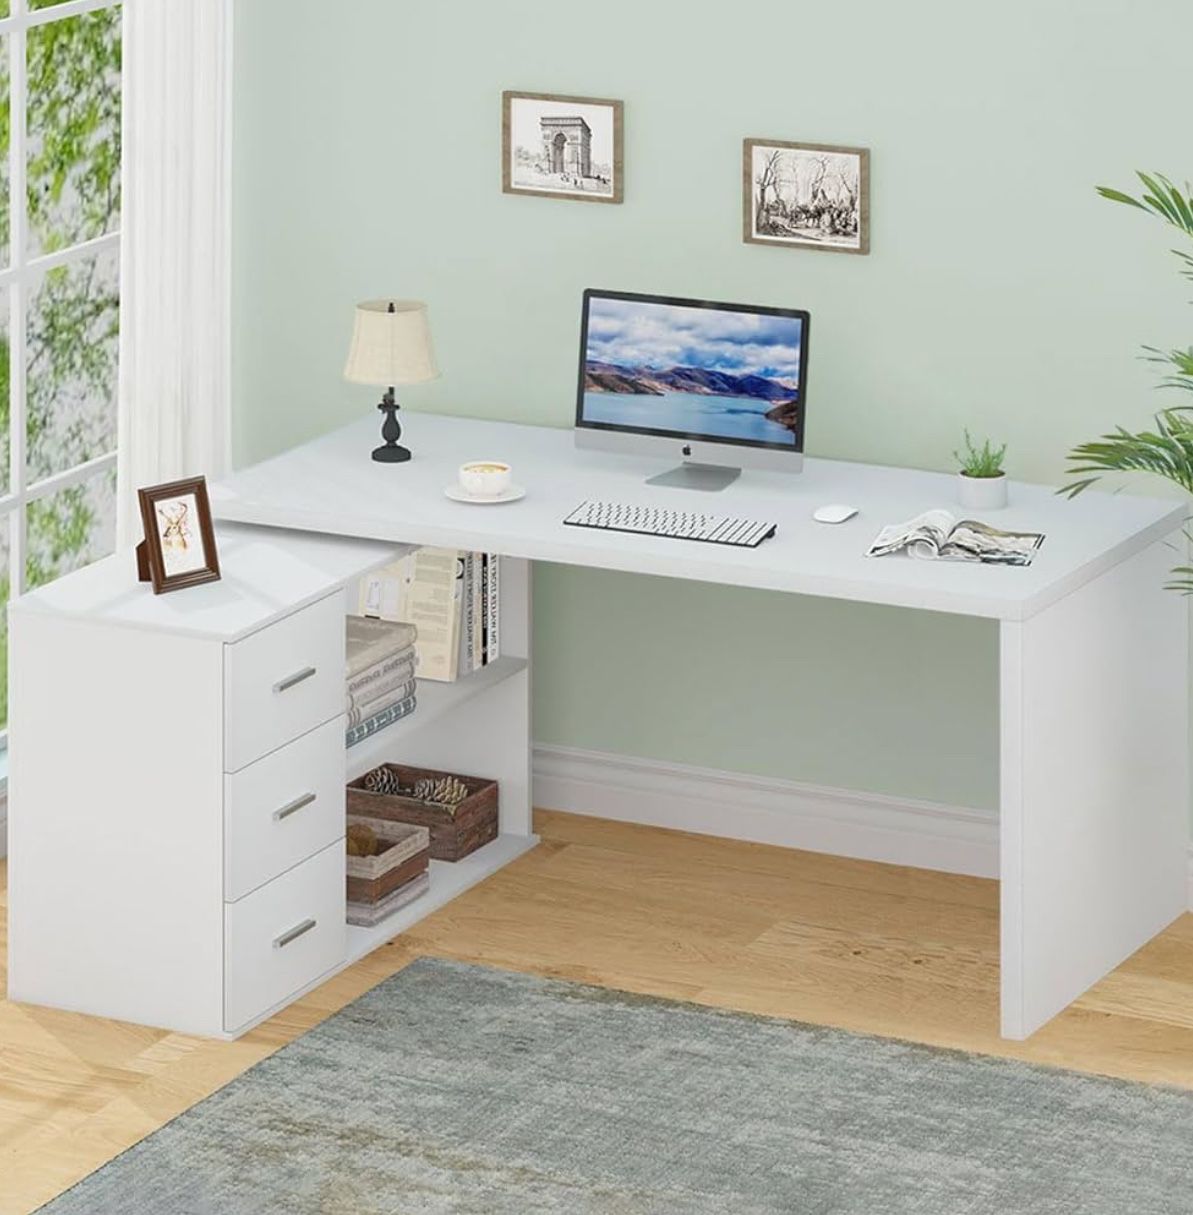 HSH White L Shaped Desk with Drawers Shelves, Corner Home Office Desk L Shape with Storage Cabinet, Large Wood Computer Desk for PC Executive Work Wri